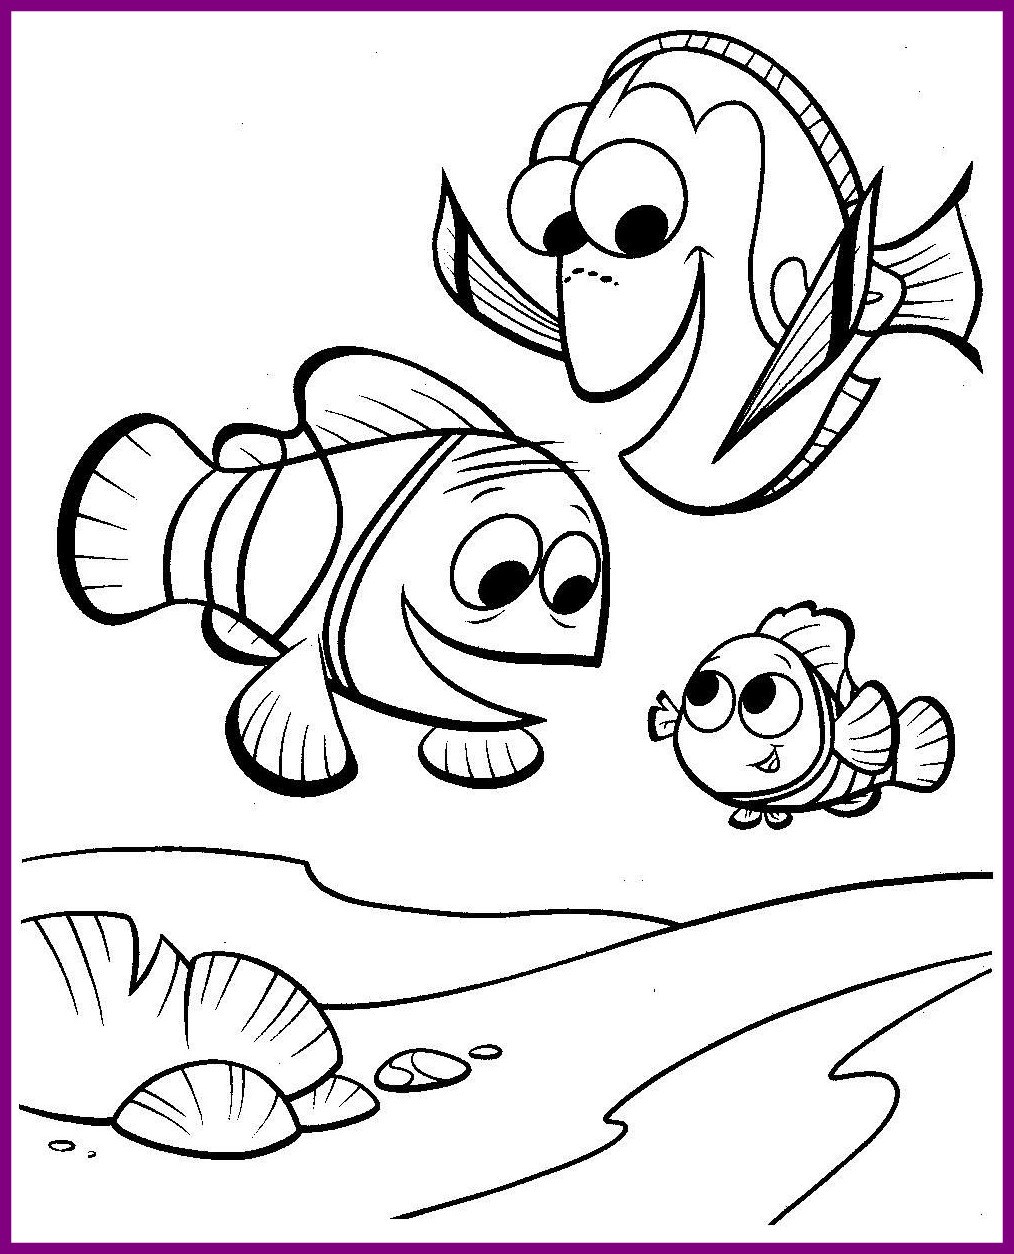 Finding Nemo Coloring Pages Free at GetColorings.com | Free printable ...